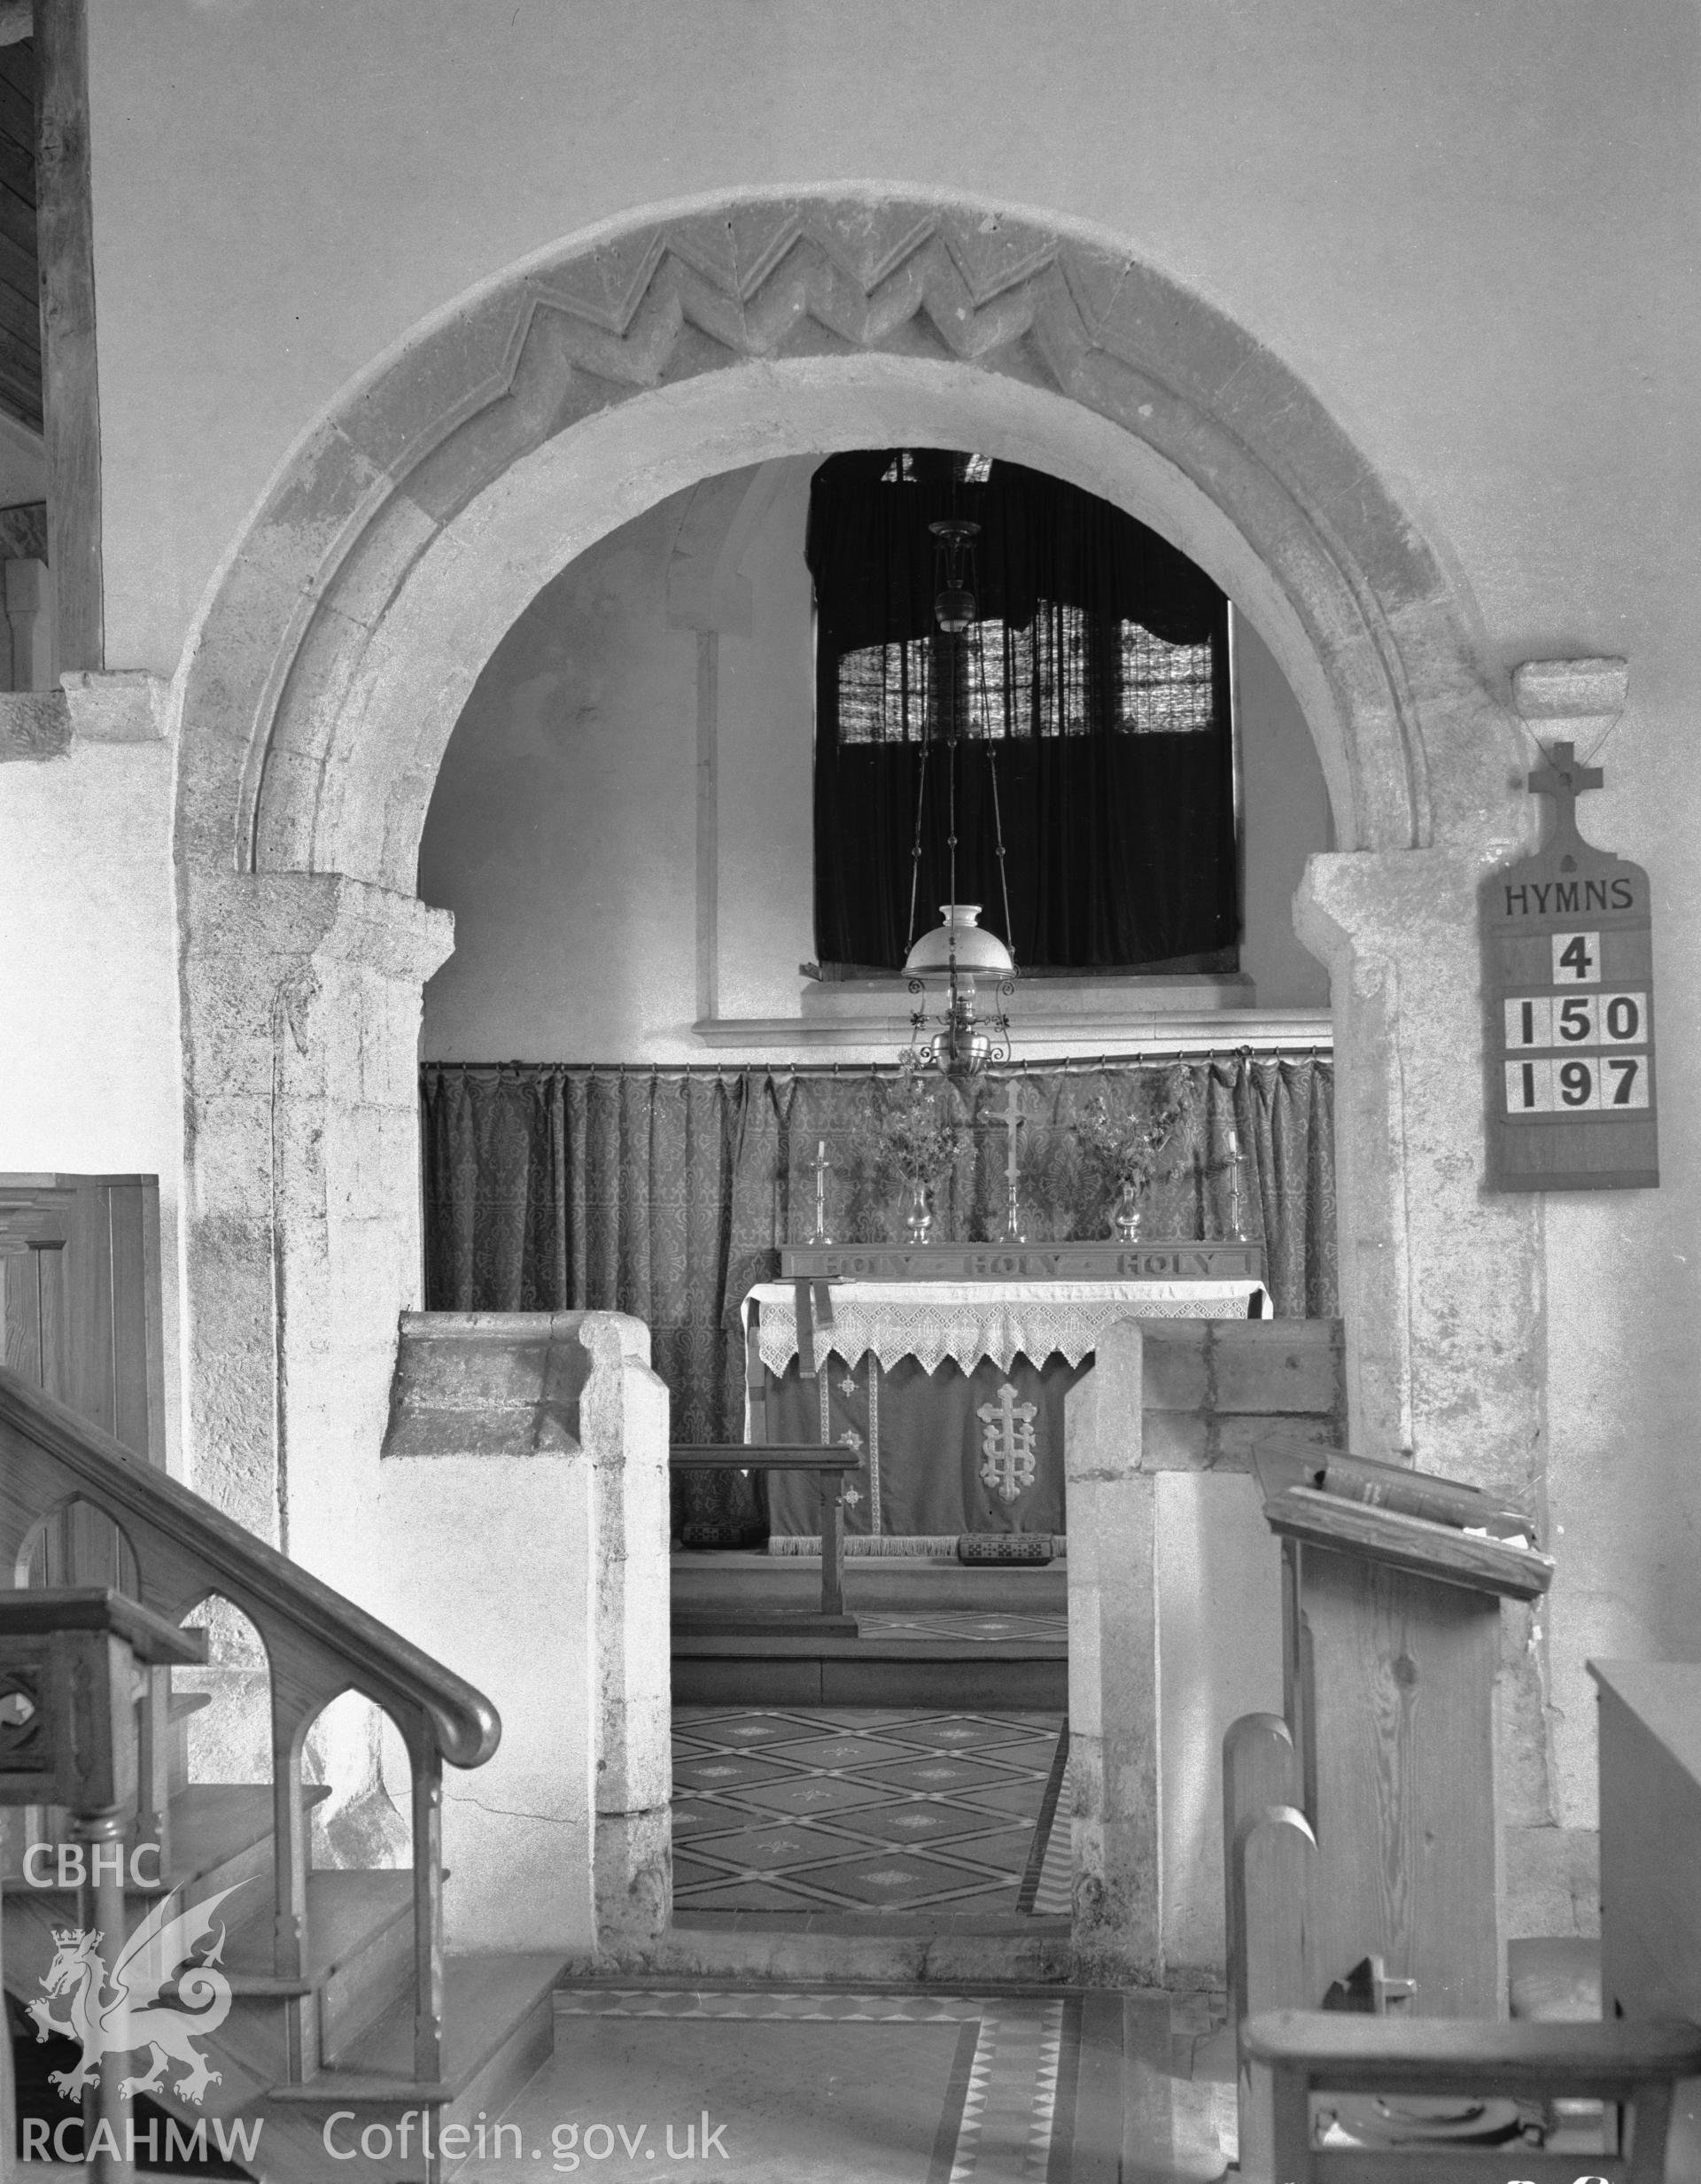 Interior view showing the west side of the chancel arch and the screen.